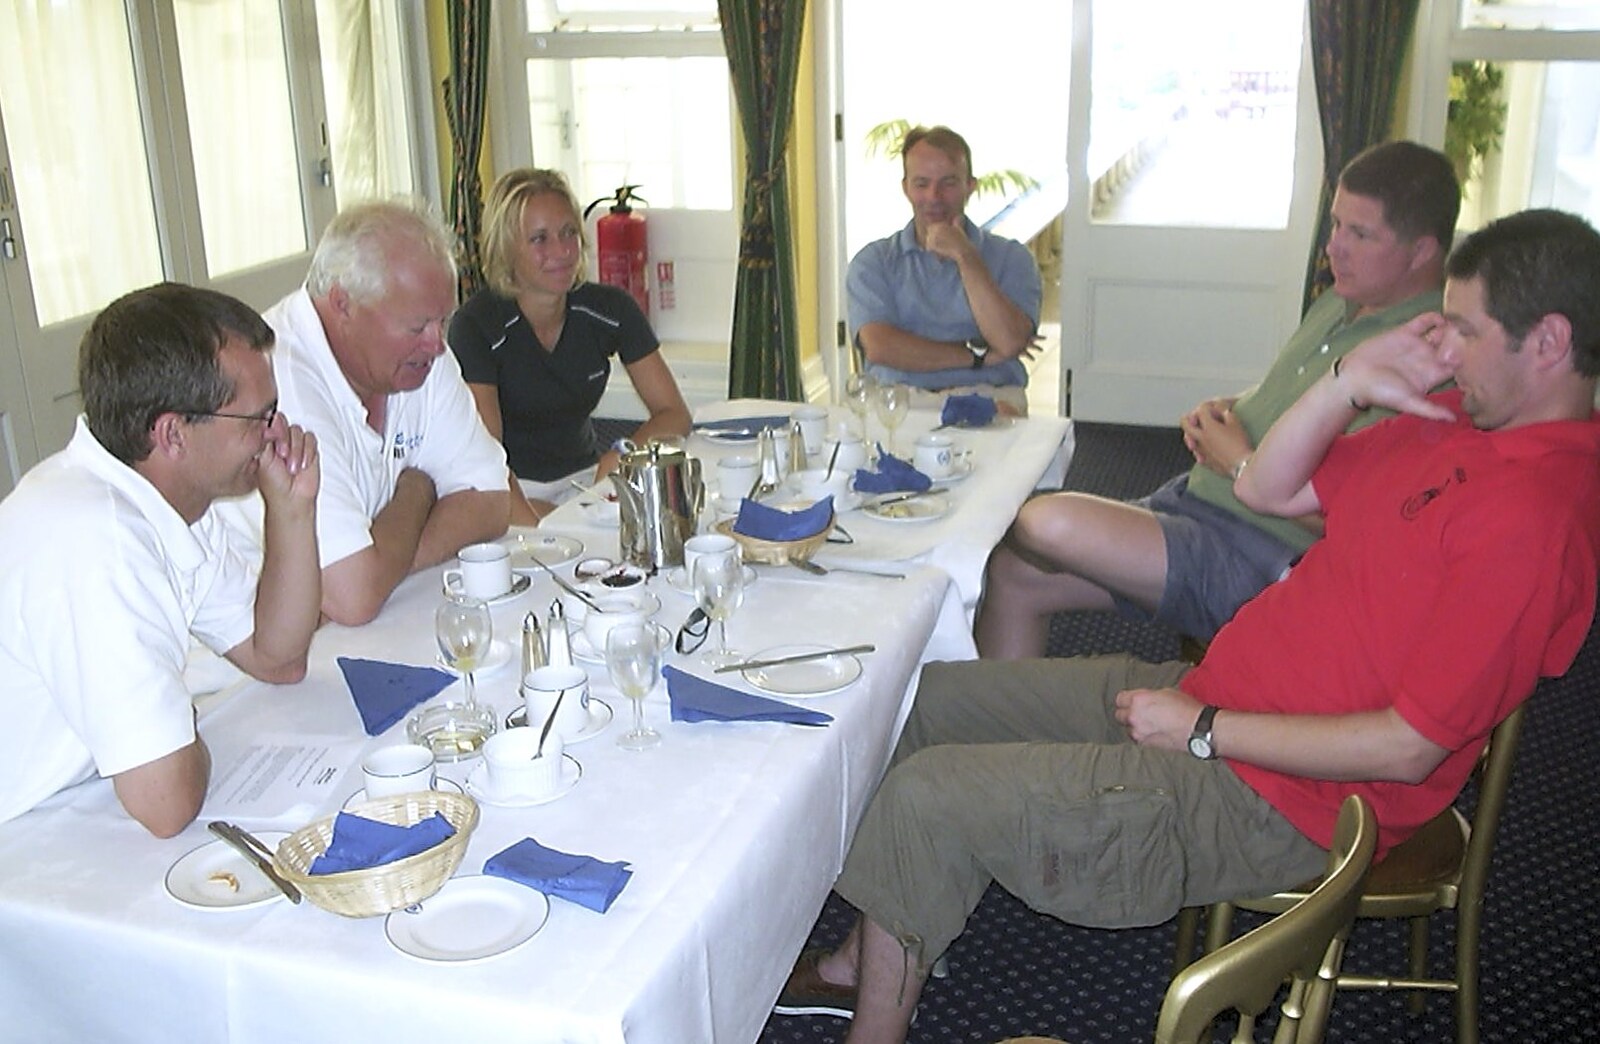 The crew discusses the day's racing from Cowes Weekend, Cowes, Isle of Wight - 7th August 2004